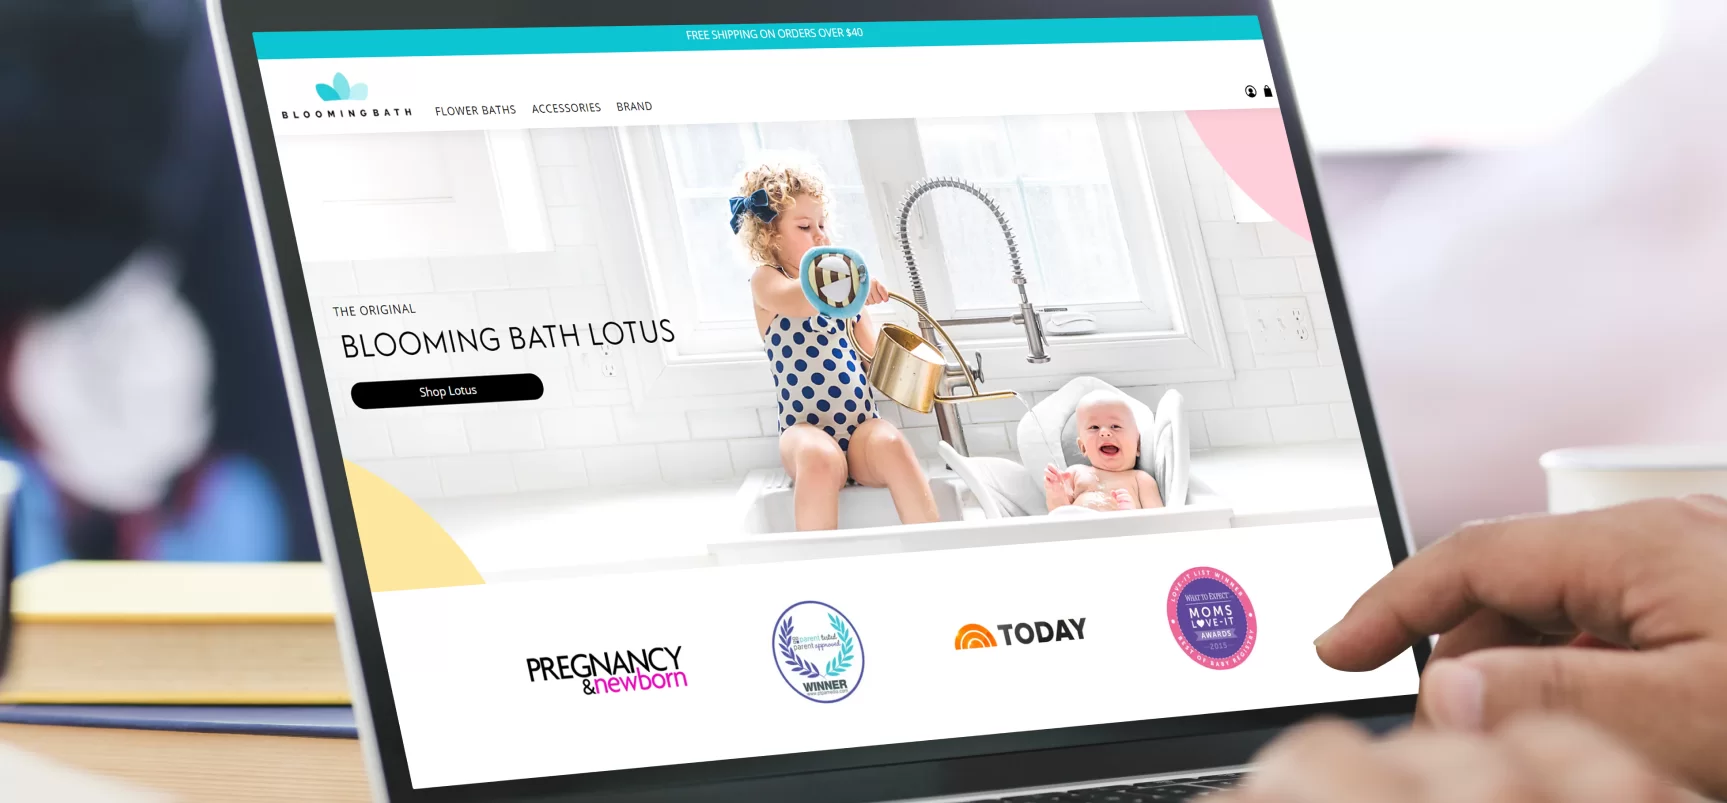 blooming bath using shopify development services by ropstam solutions